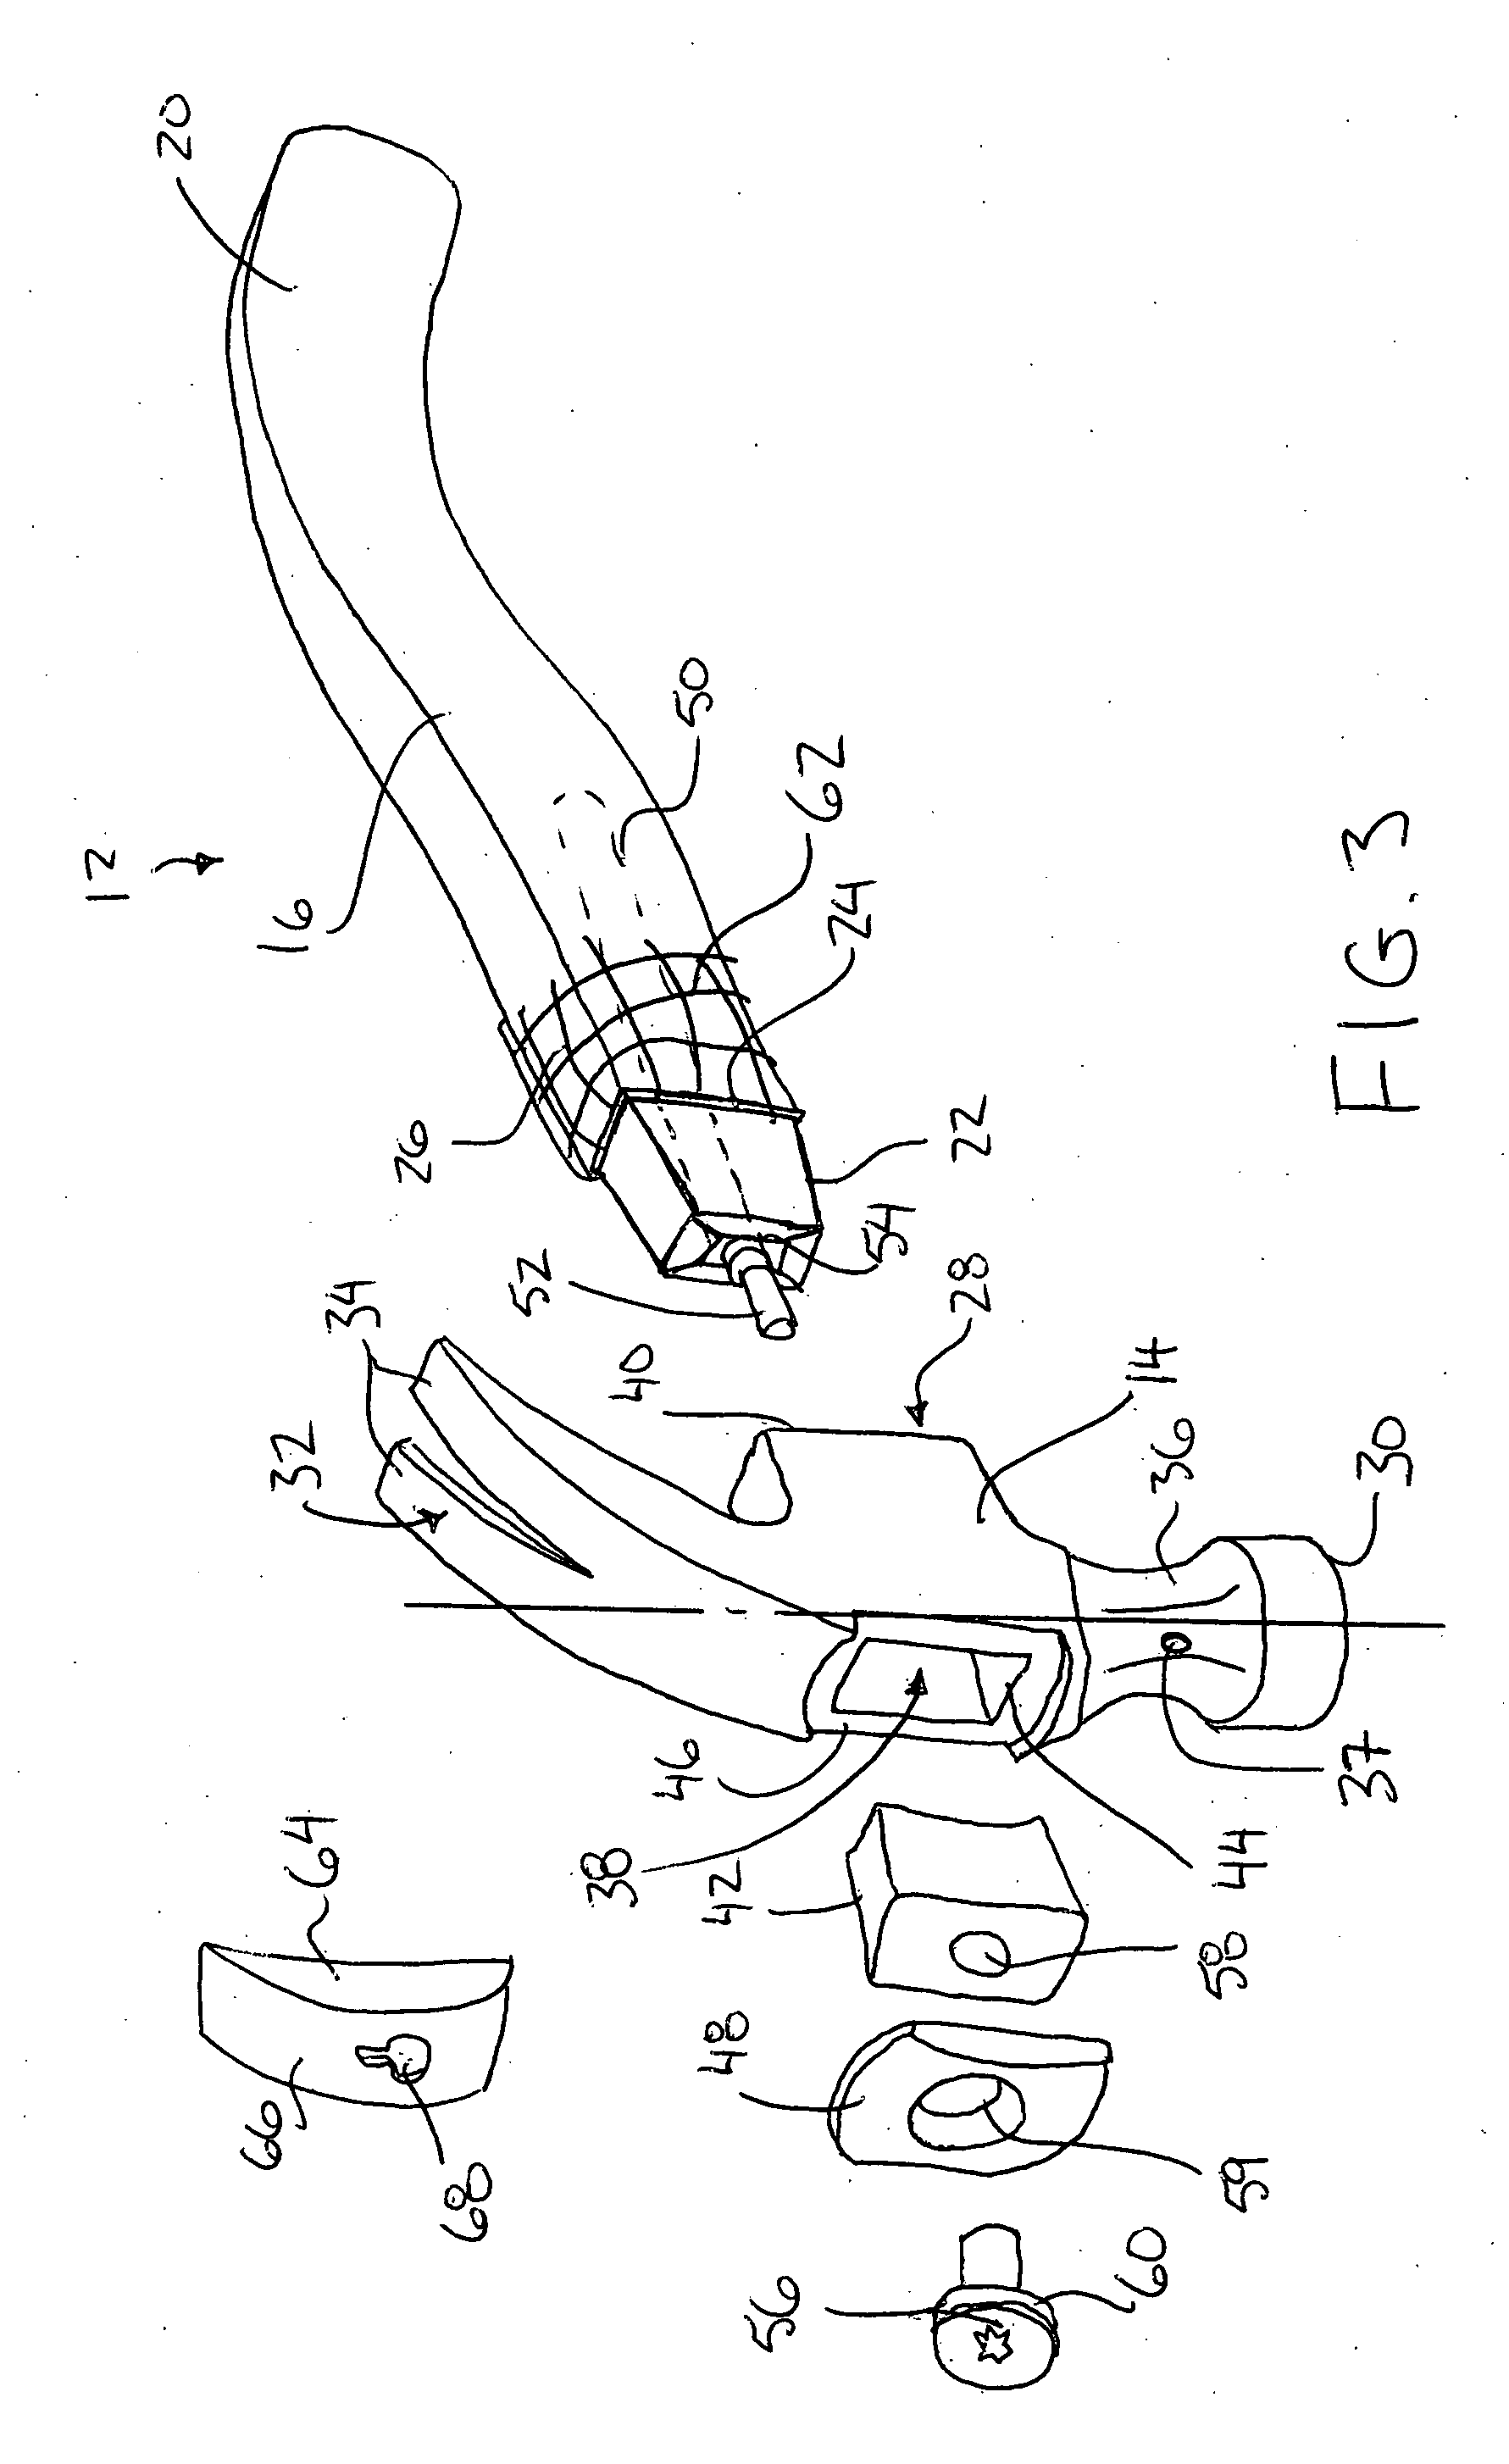 Ergonomic tool handle and related hammer system